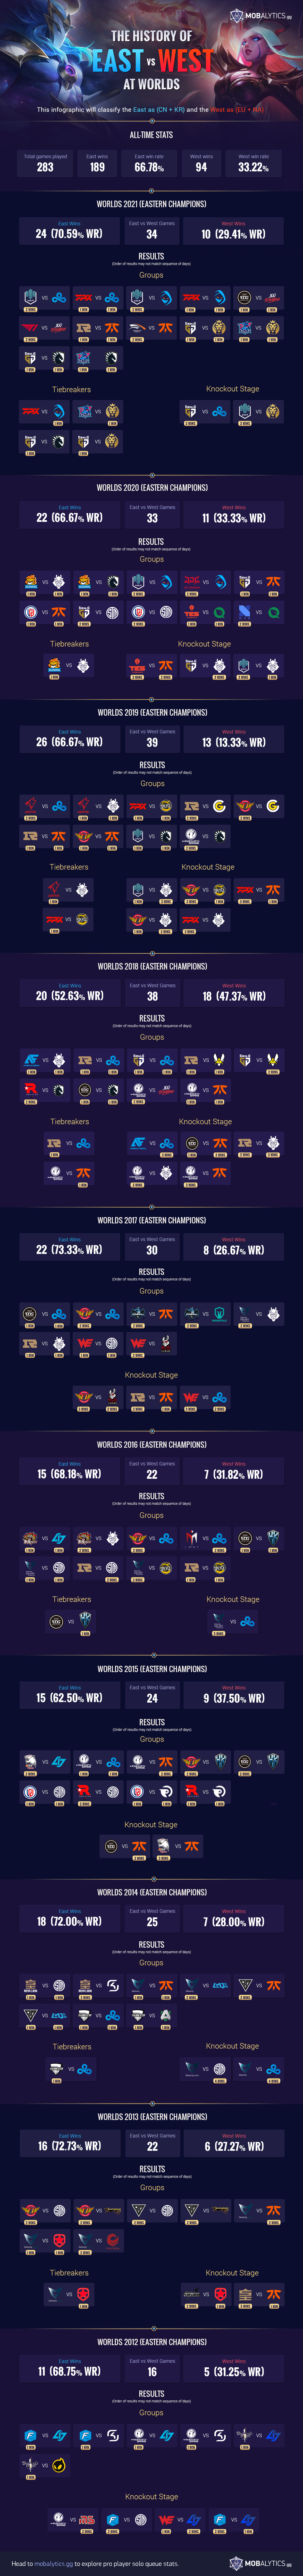 East vs West Worlds All Time Stats (updated)